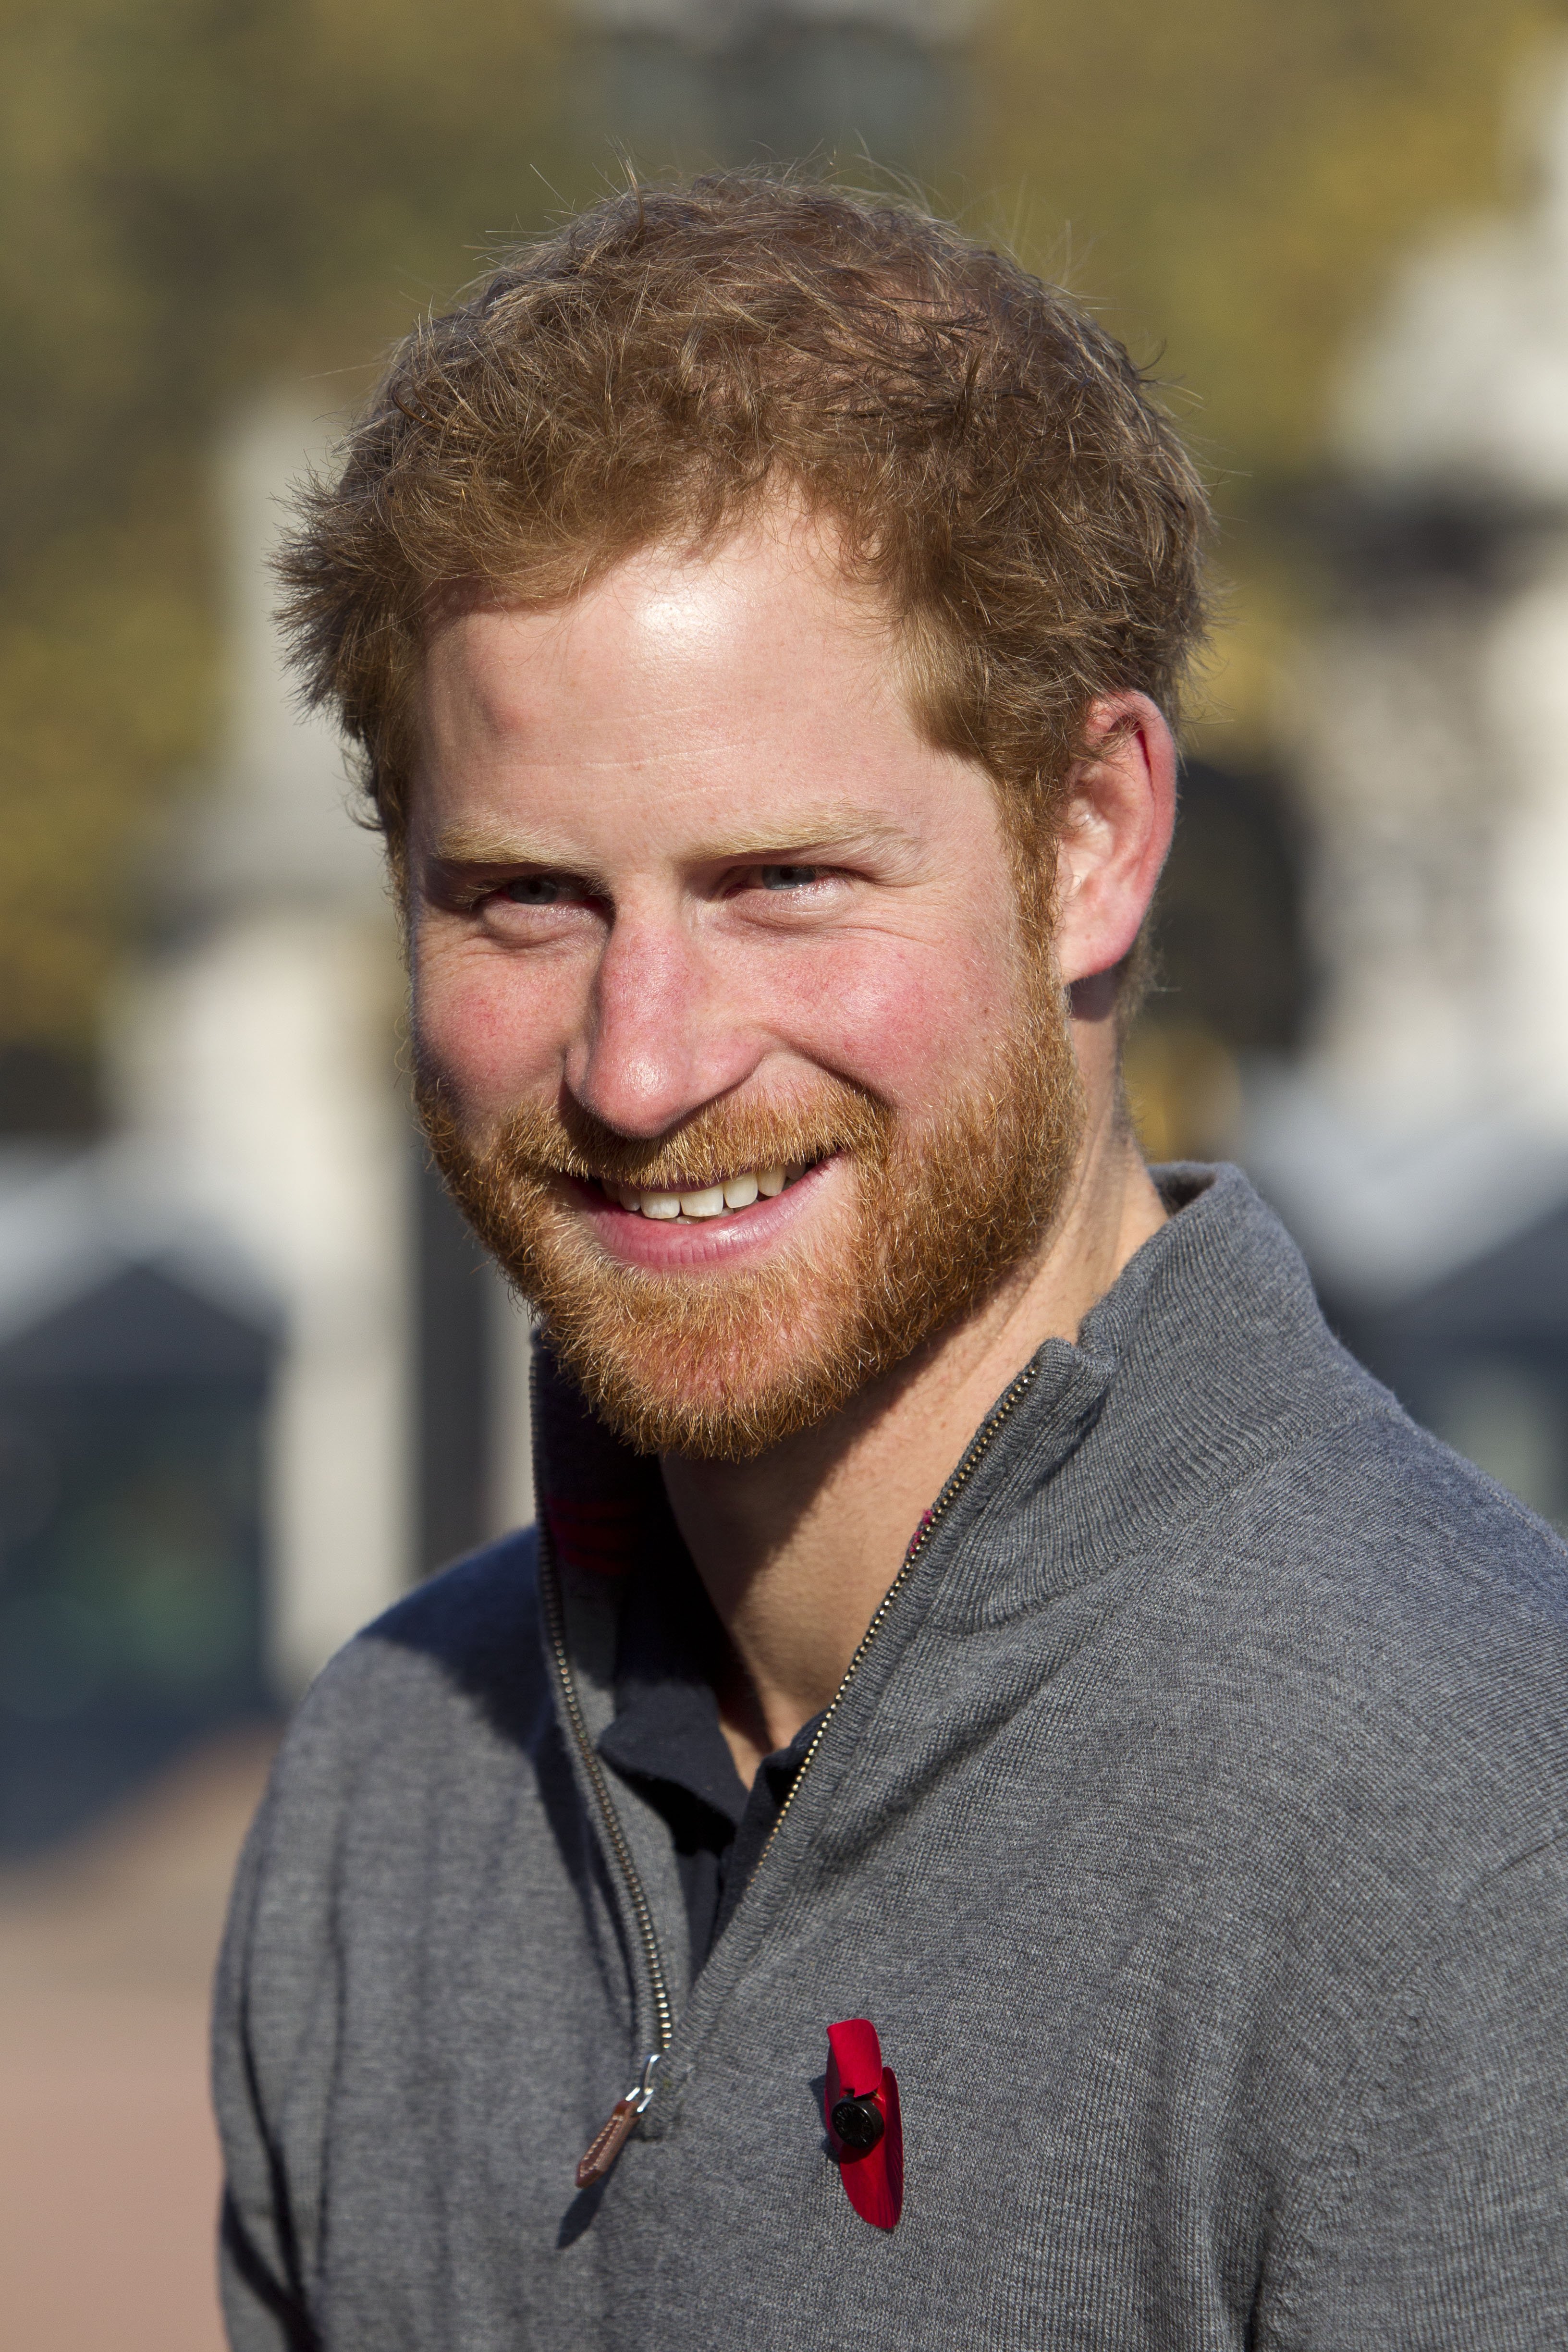 Prince Harry | Getty Images / Global Images of Ukraine